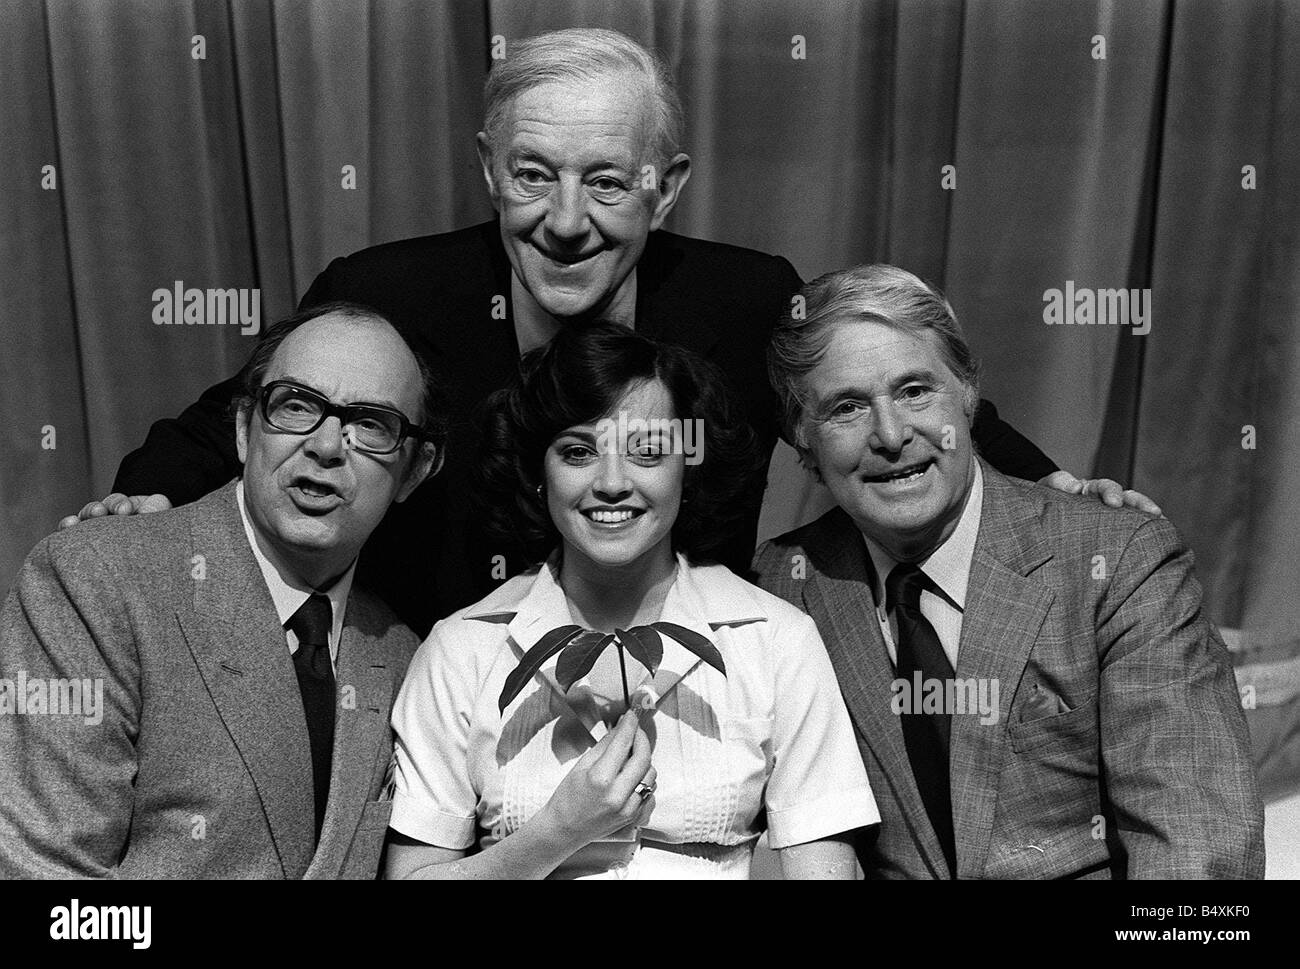 Sir Alec Guinness with Eric Morecambe Ernie Wise and Gemma Craven appearing in the Morecambe and Wise Christmas show Stock Photo